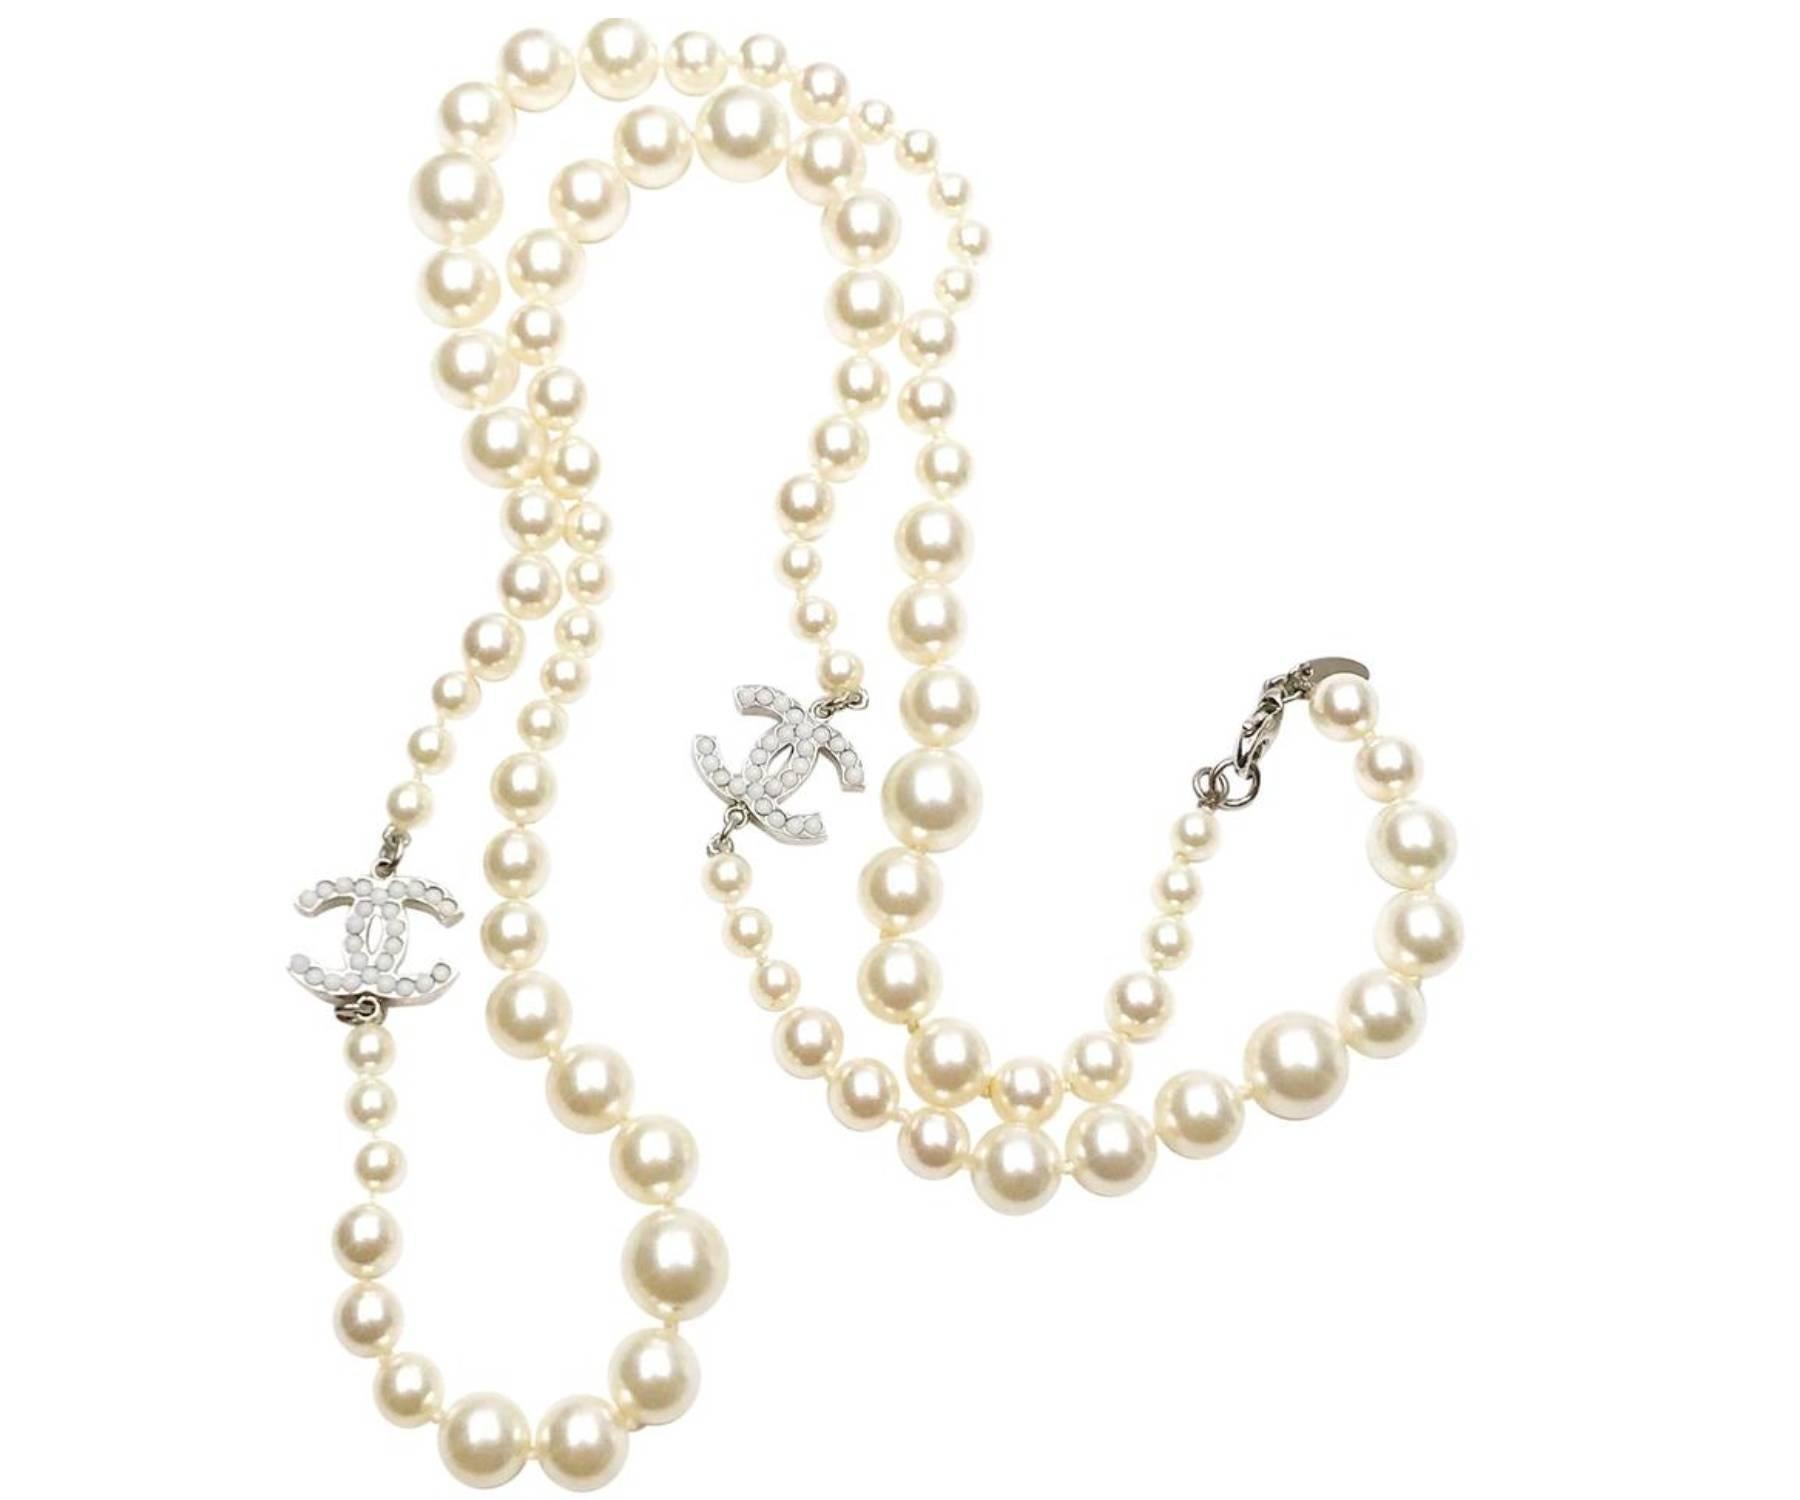 Chanel Classic 2 Silver CC White Bead Pearl Necklace

*Marked 10
*Made in France
*Comes with the original box

-It is approximately 34″ long.
-Wear it as long necklace or wrap it double as short necklace
-Very classic and pretty
-In an excellent